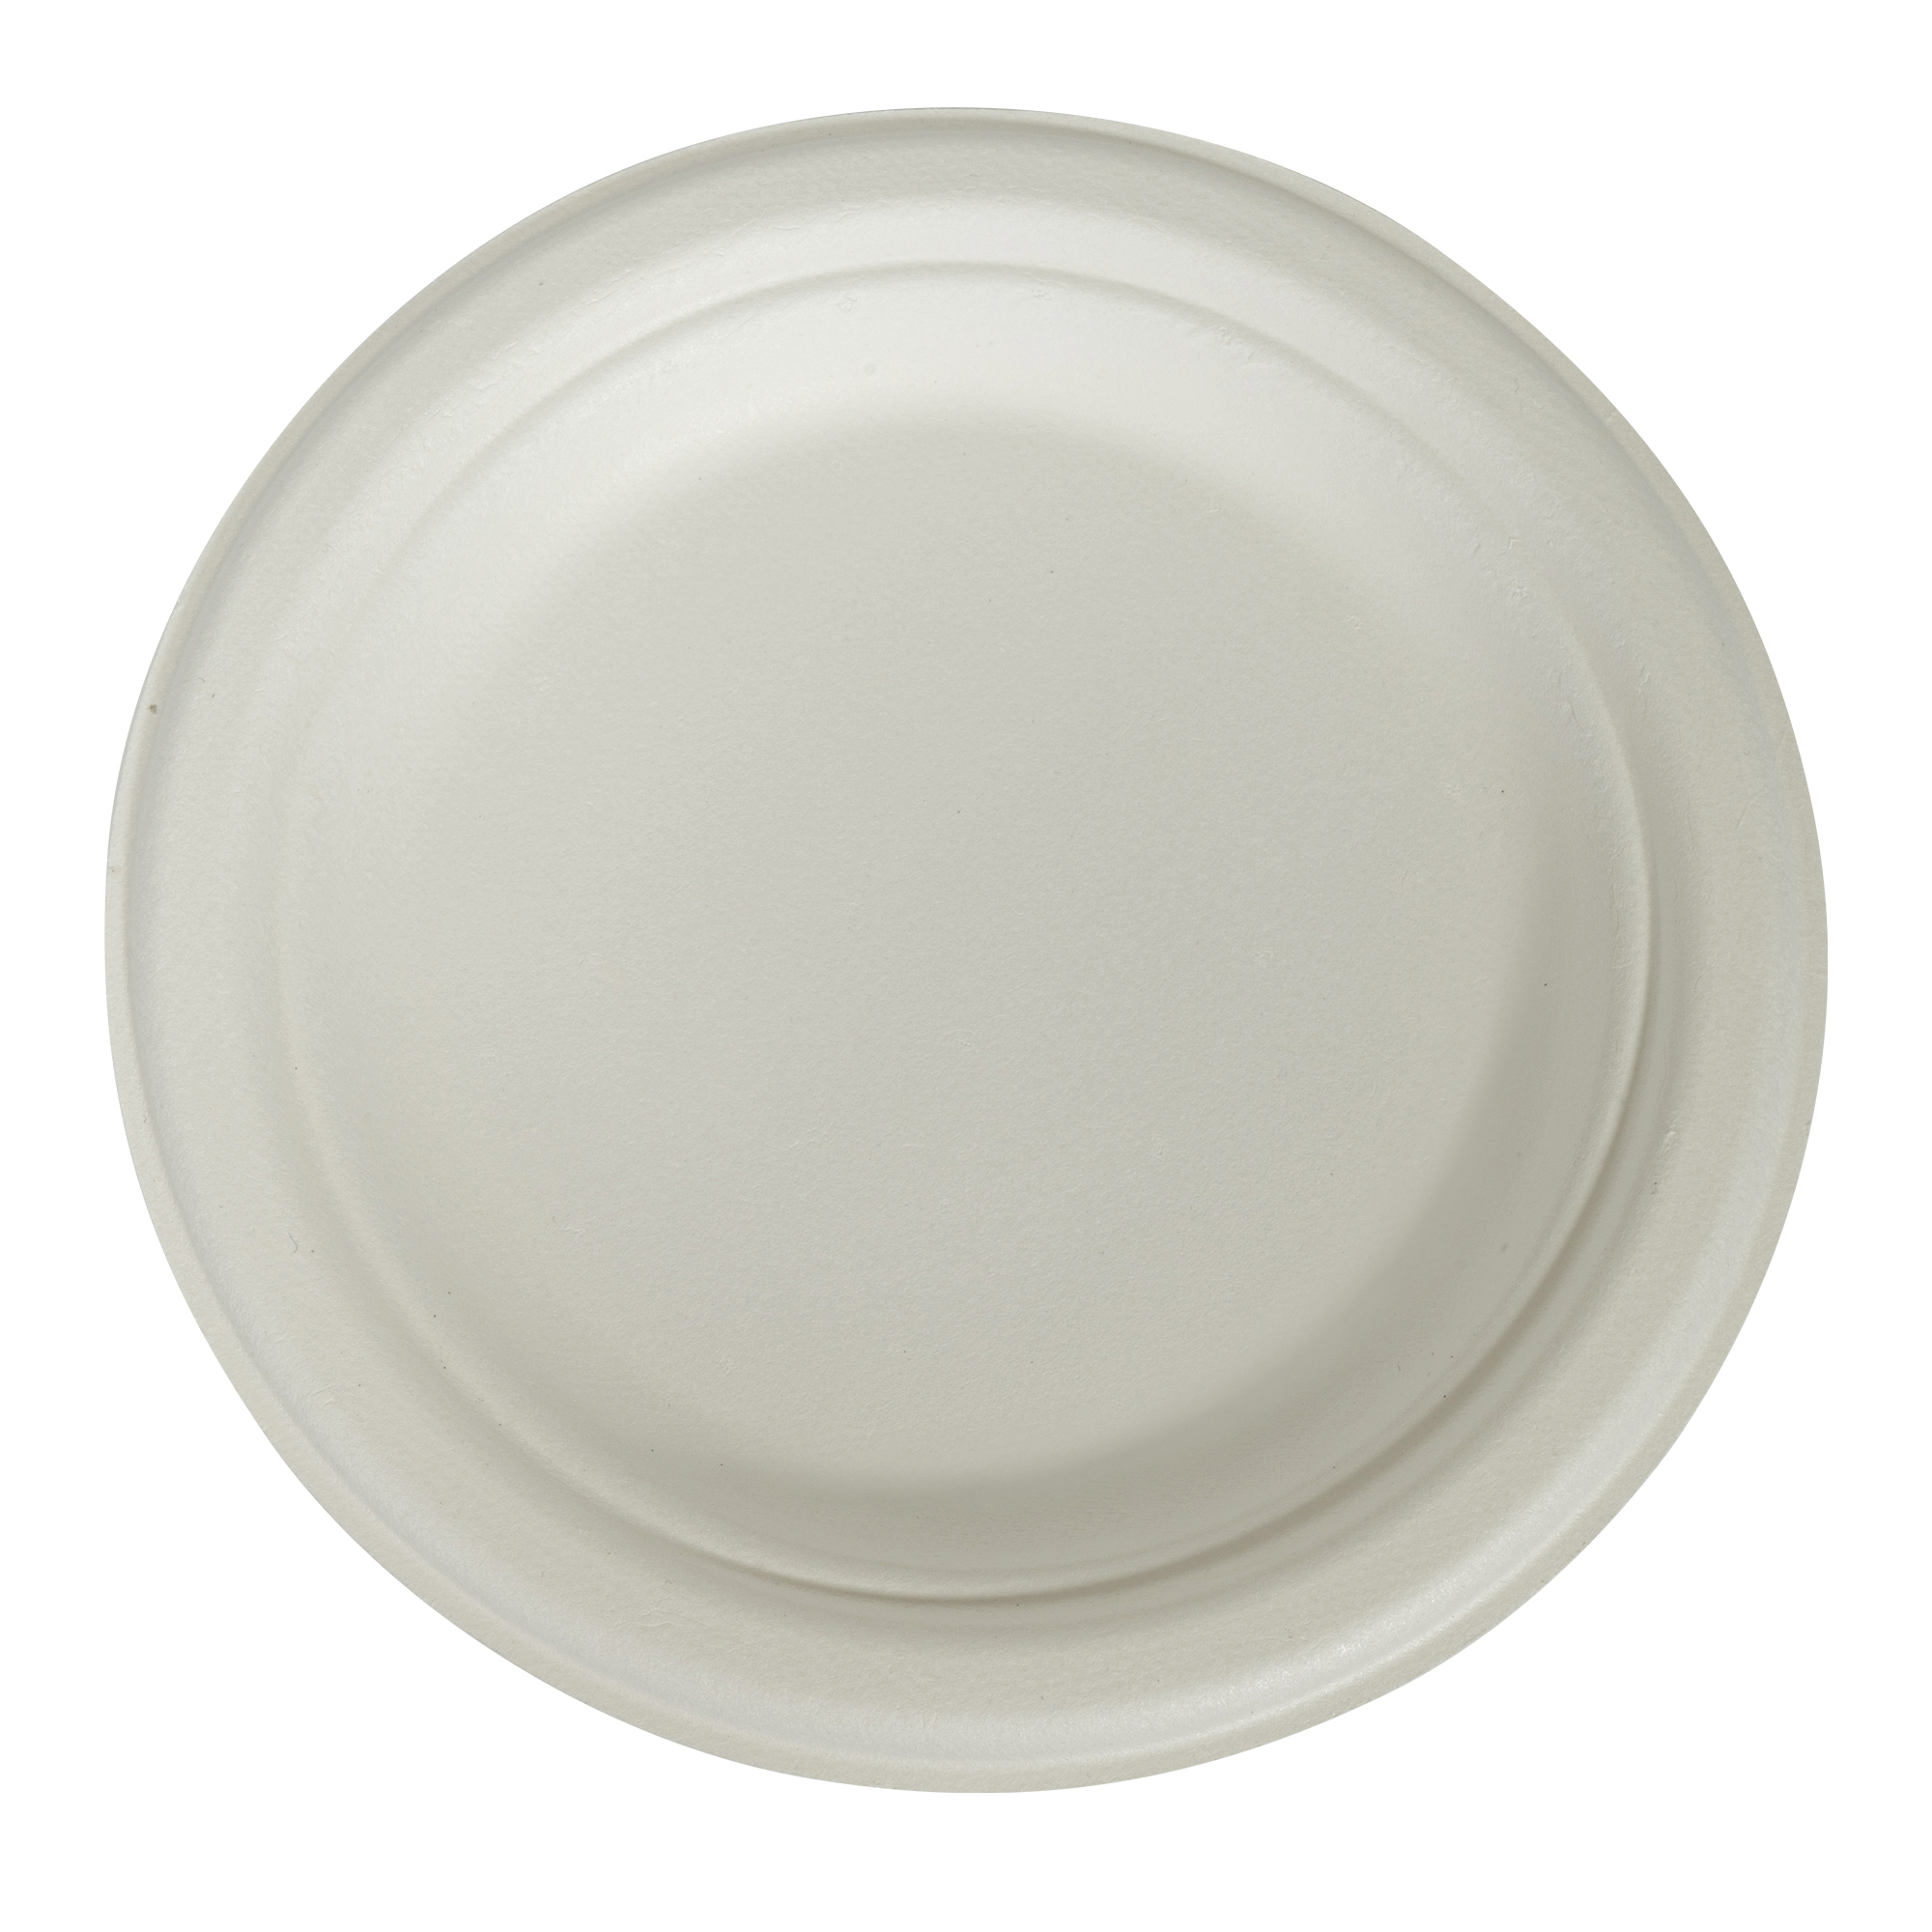 Round Compostable Fiber Plate 10" 125pc/pack - White